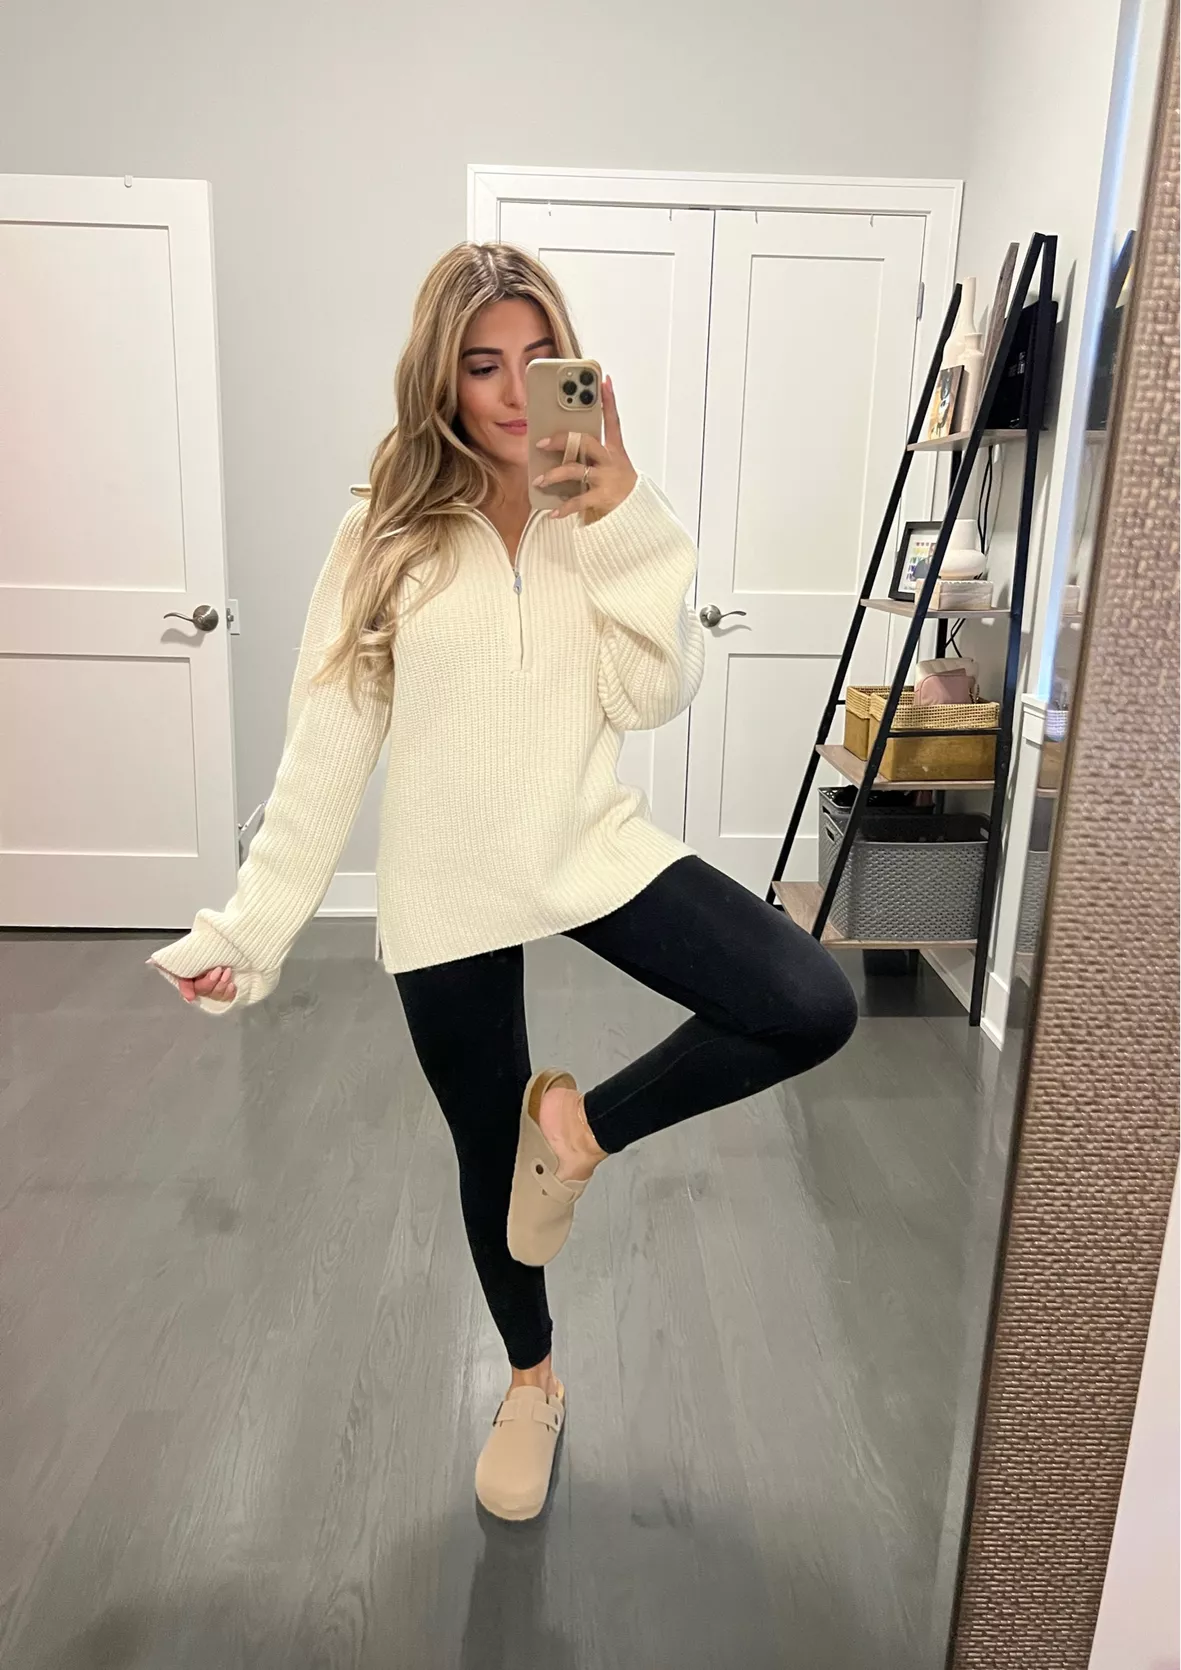 Short Sleeve Sweater with Leggings Outfits (2 ideas & outfits)